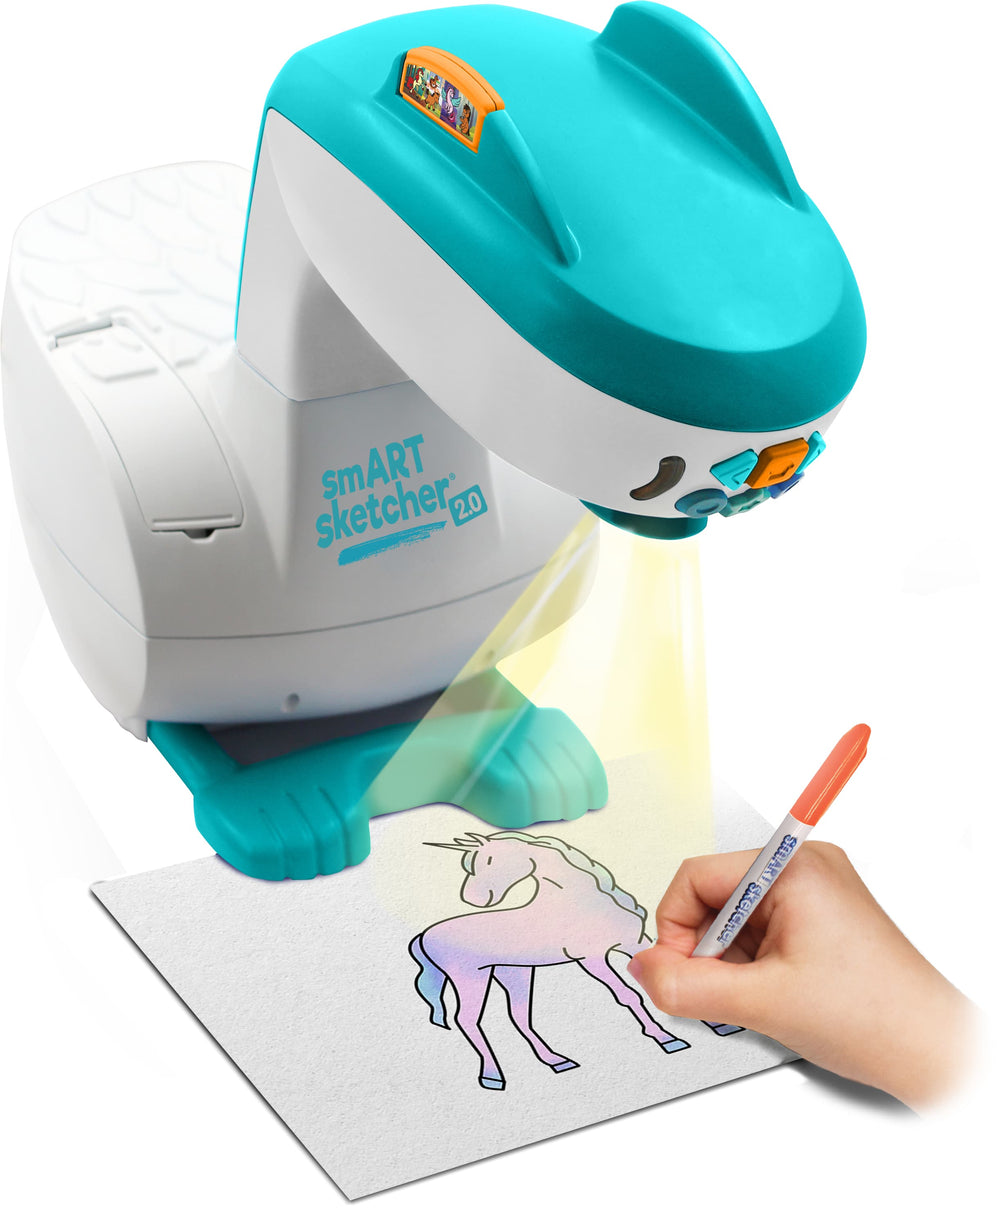 Now 20% Off! smART sketcher 2.0 Projector for kids makes the